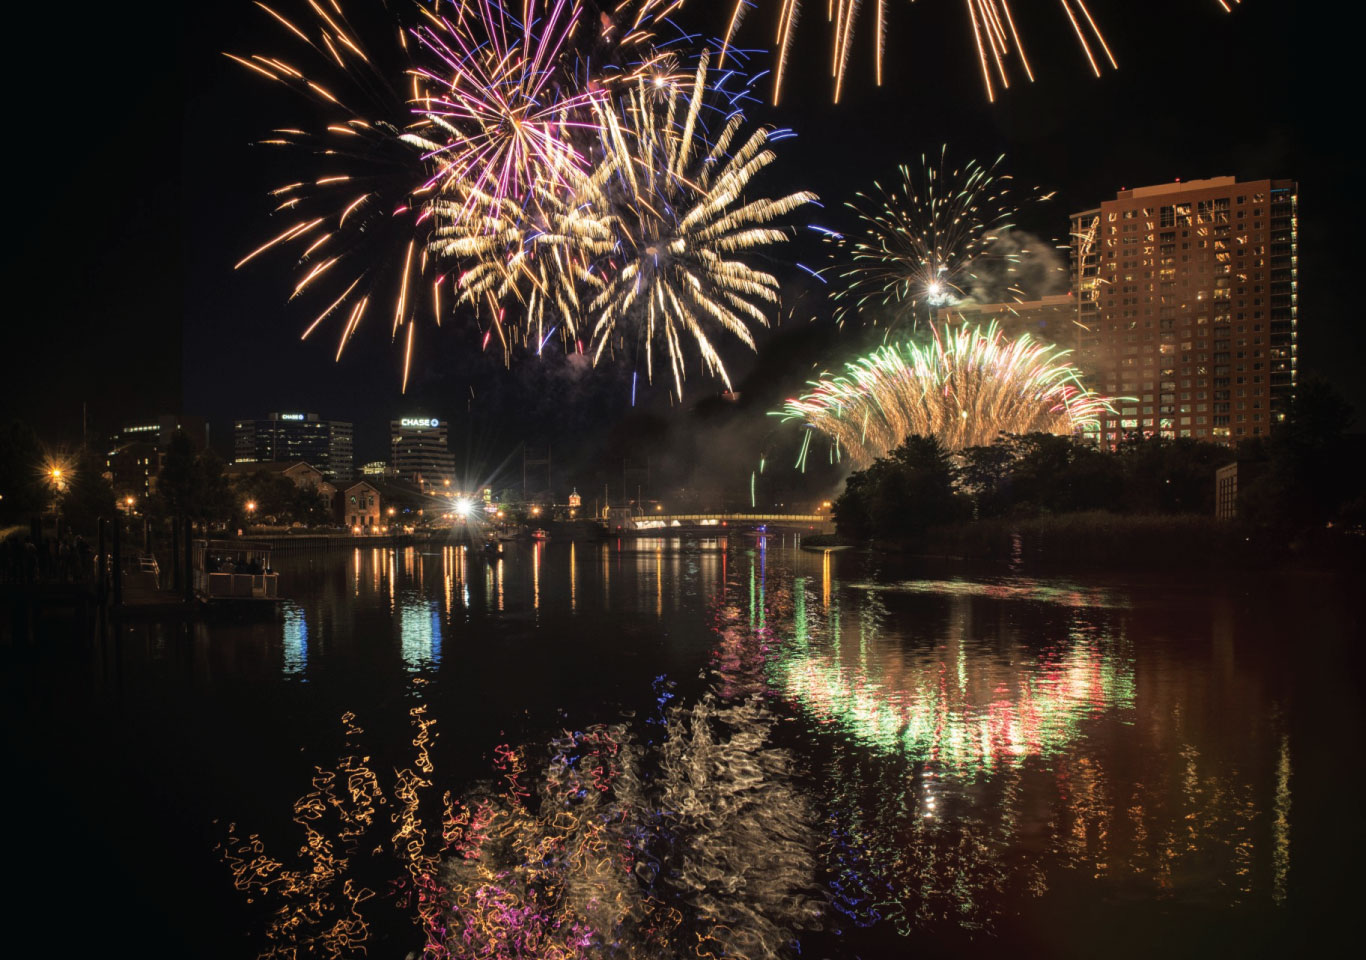 Mayor Purzycki Invites Citizens to Celebrate the 4th of July with Fireworks and Activities Along the Christina Riverfront 